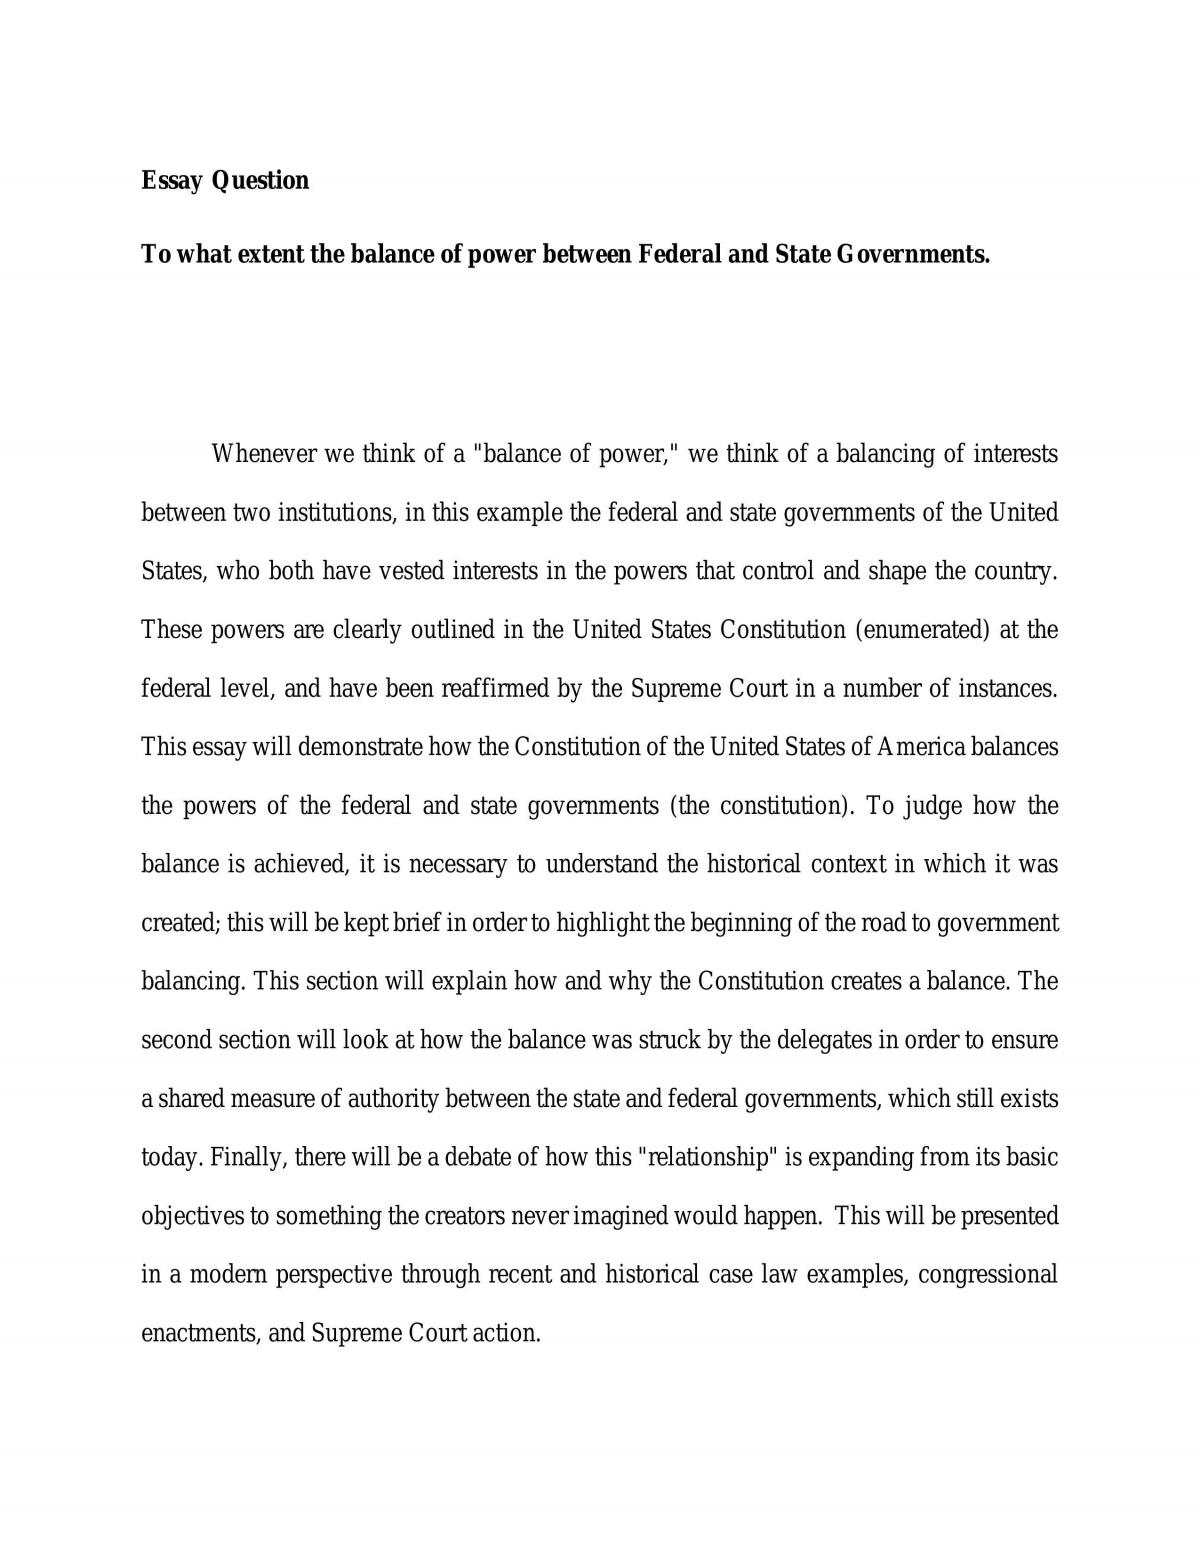 Balance of power between federal and state governments. - Page 1